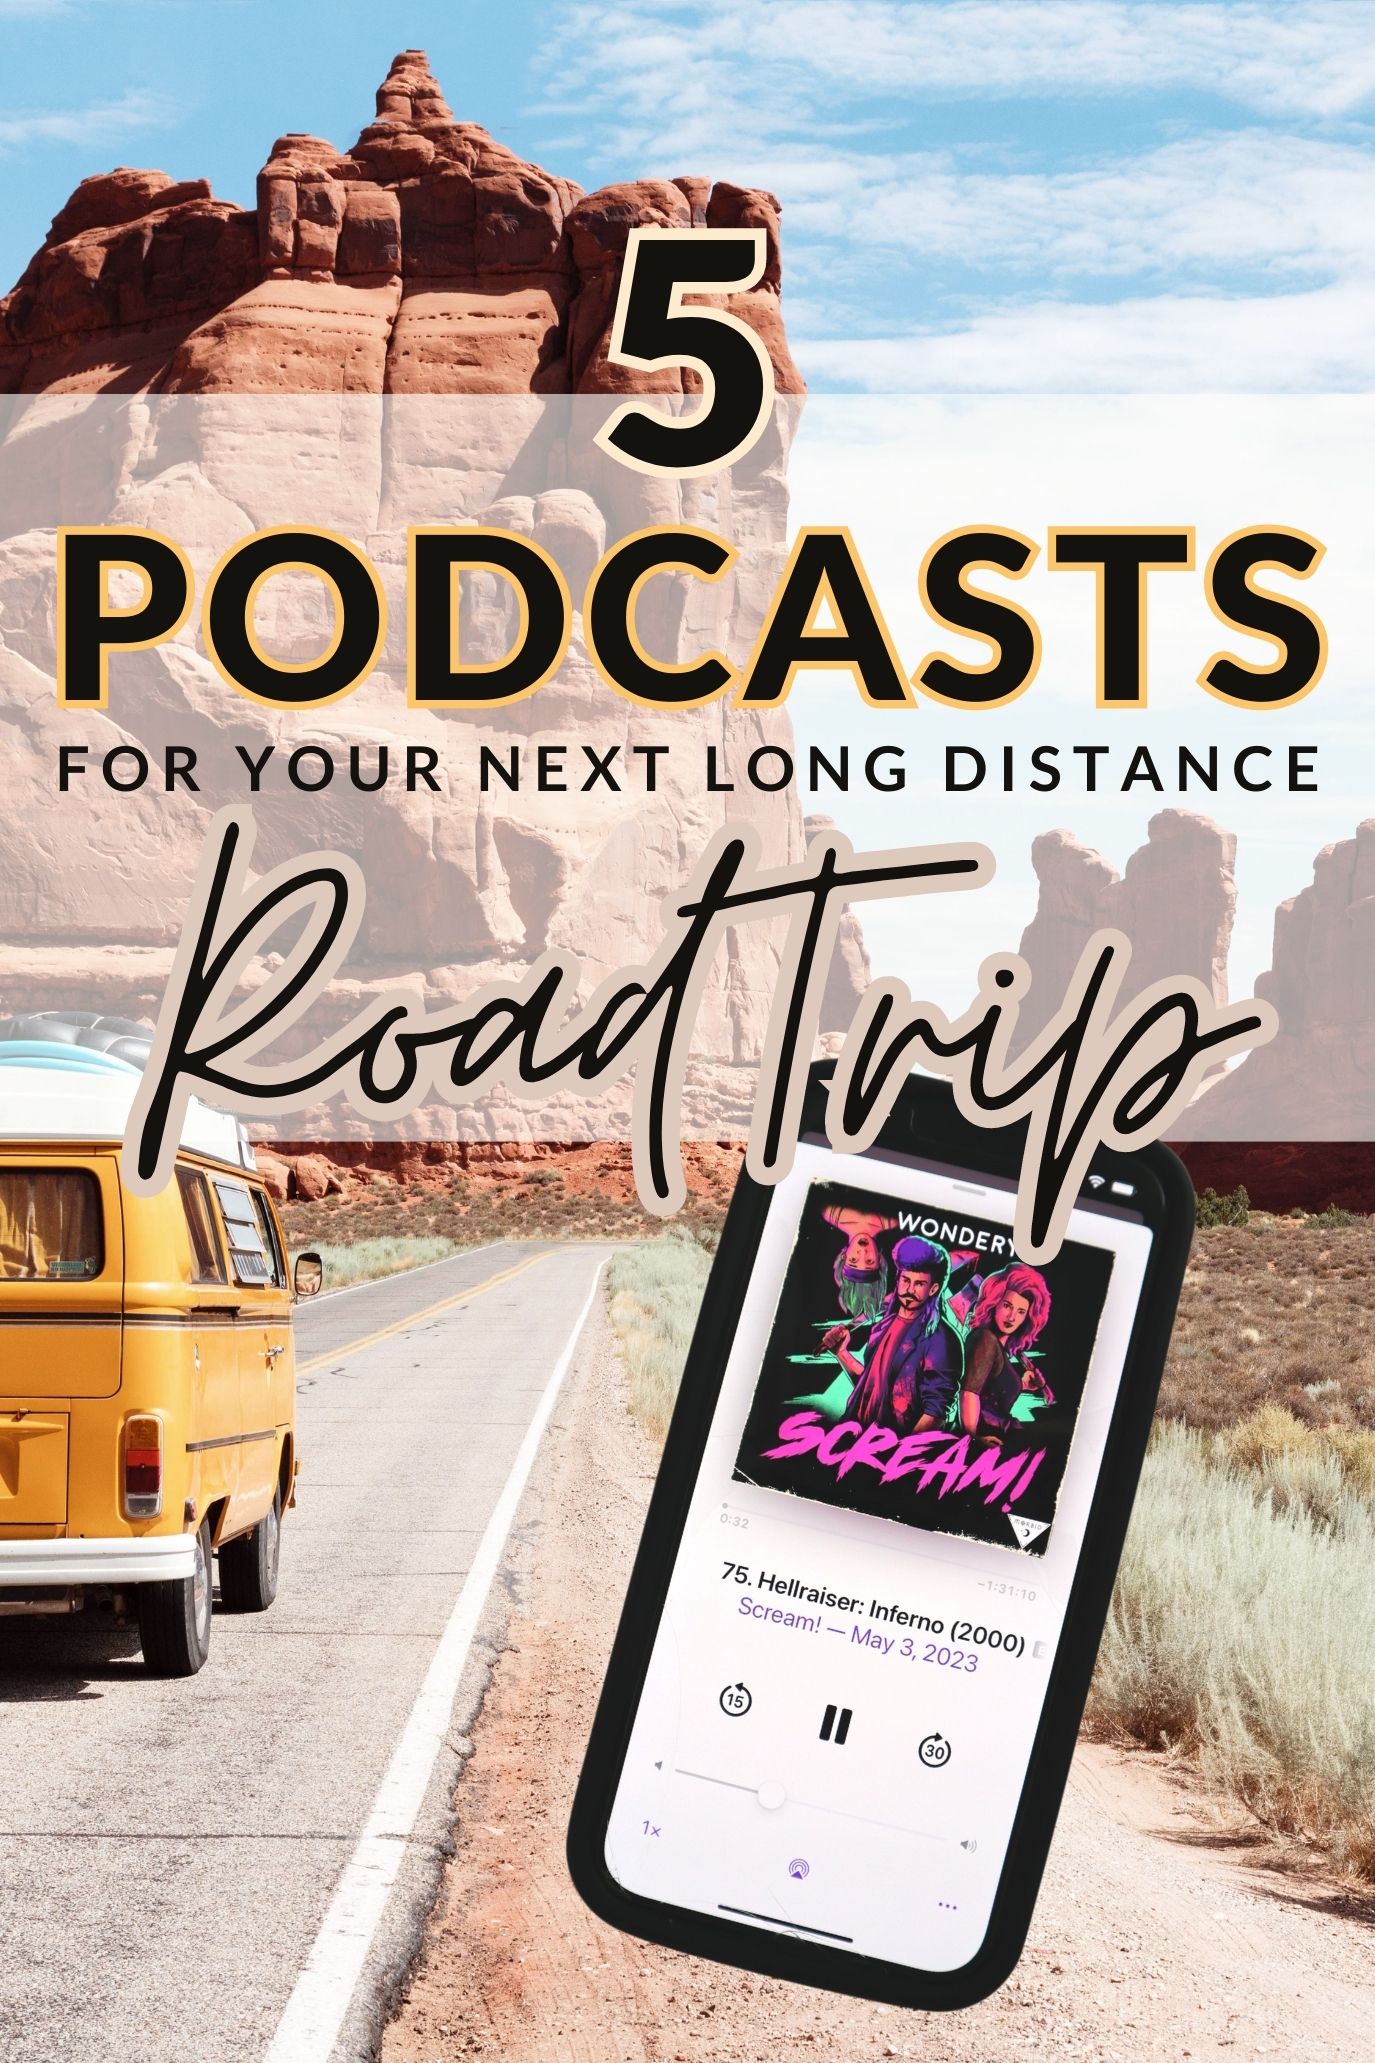 5 Podcasts for your Next Long Distance Road Trip